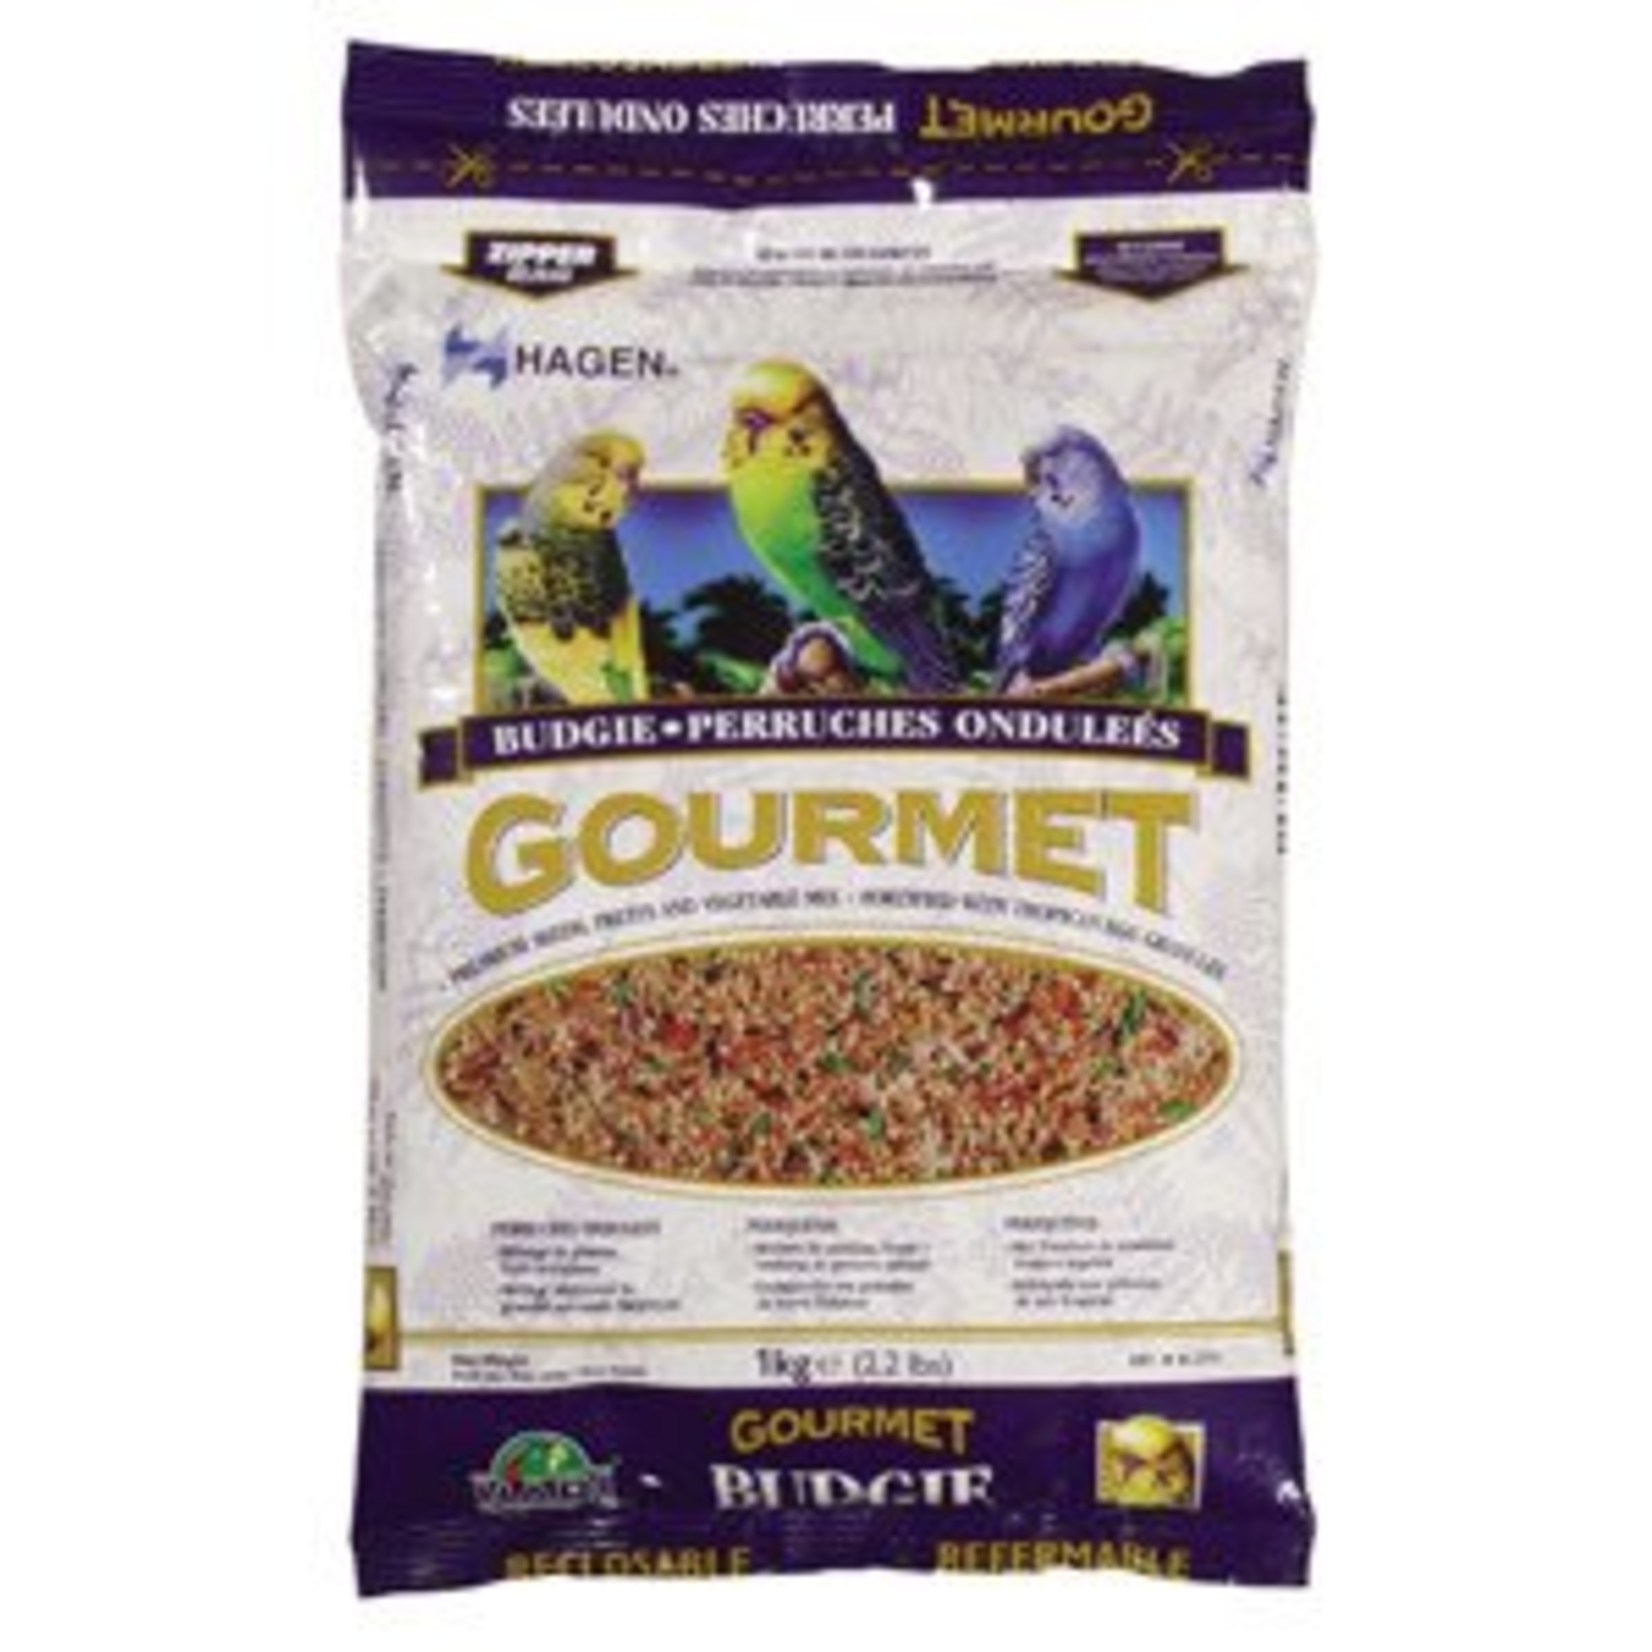 Hagen Gourmet Seed Mix for Budgies, 1 kg (2.2 lbs)